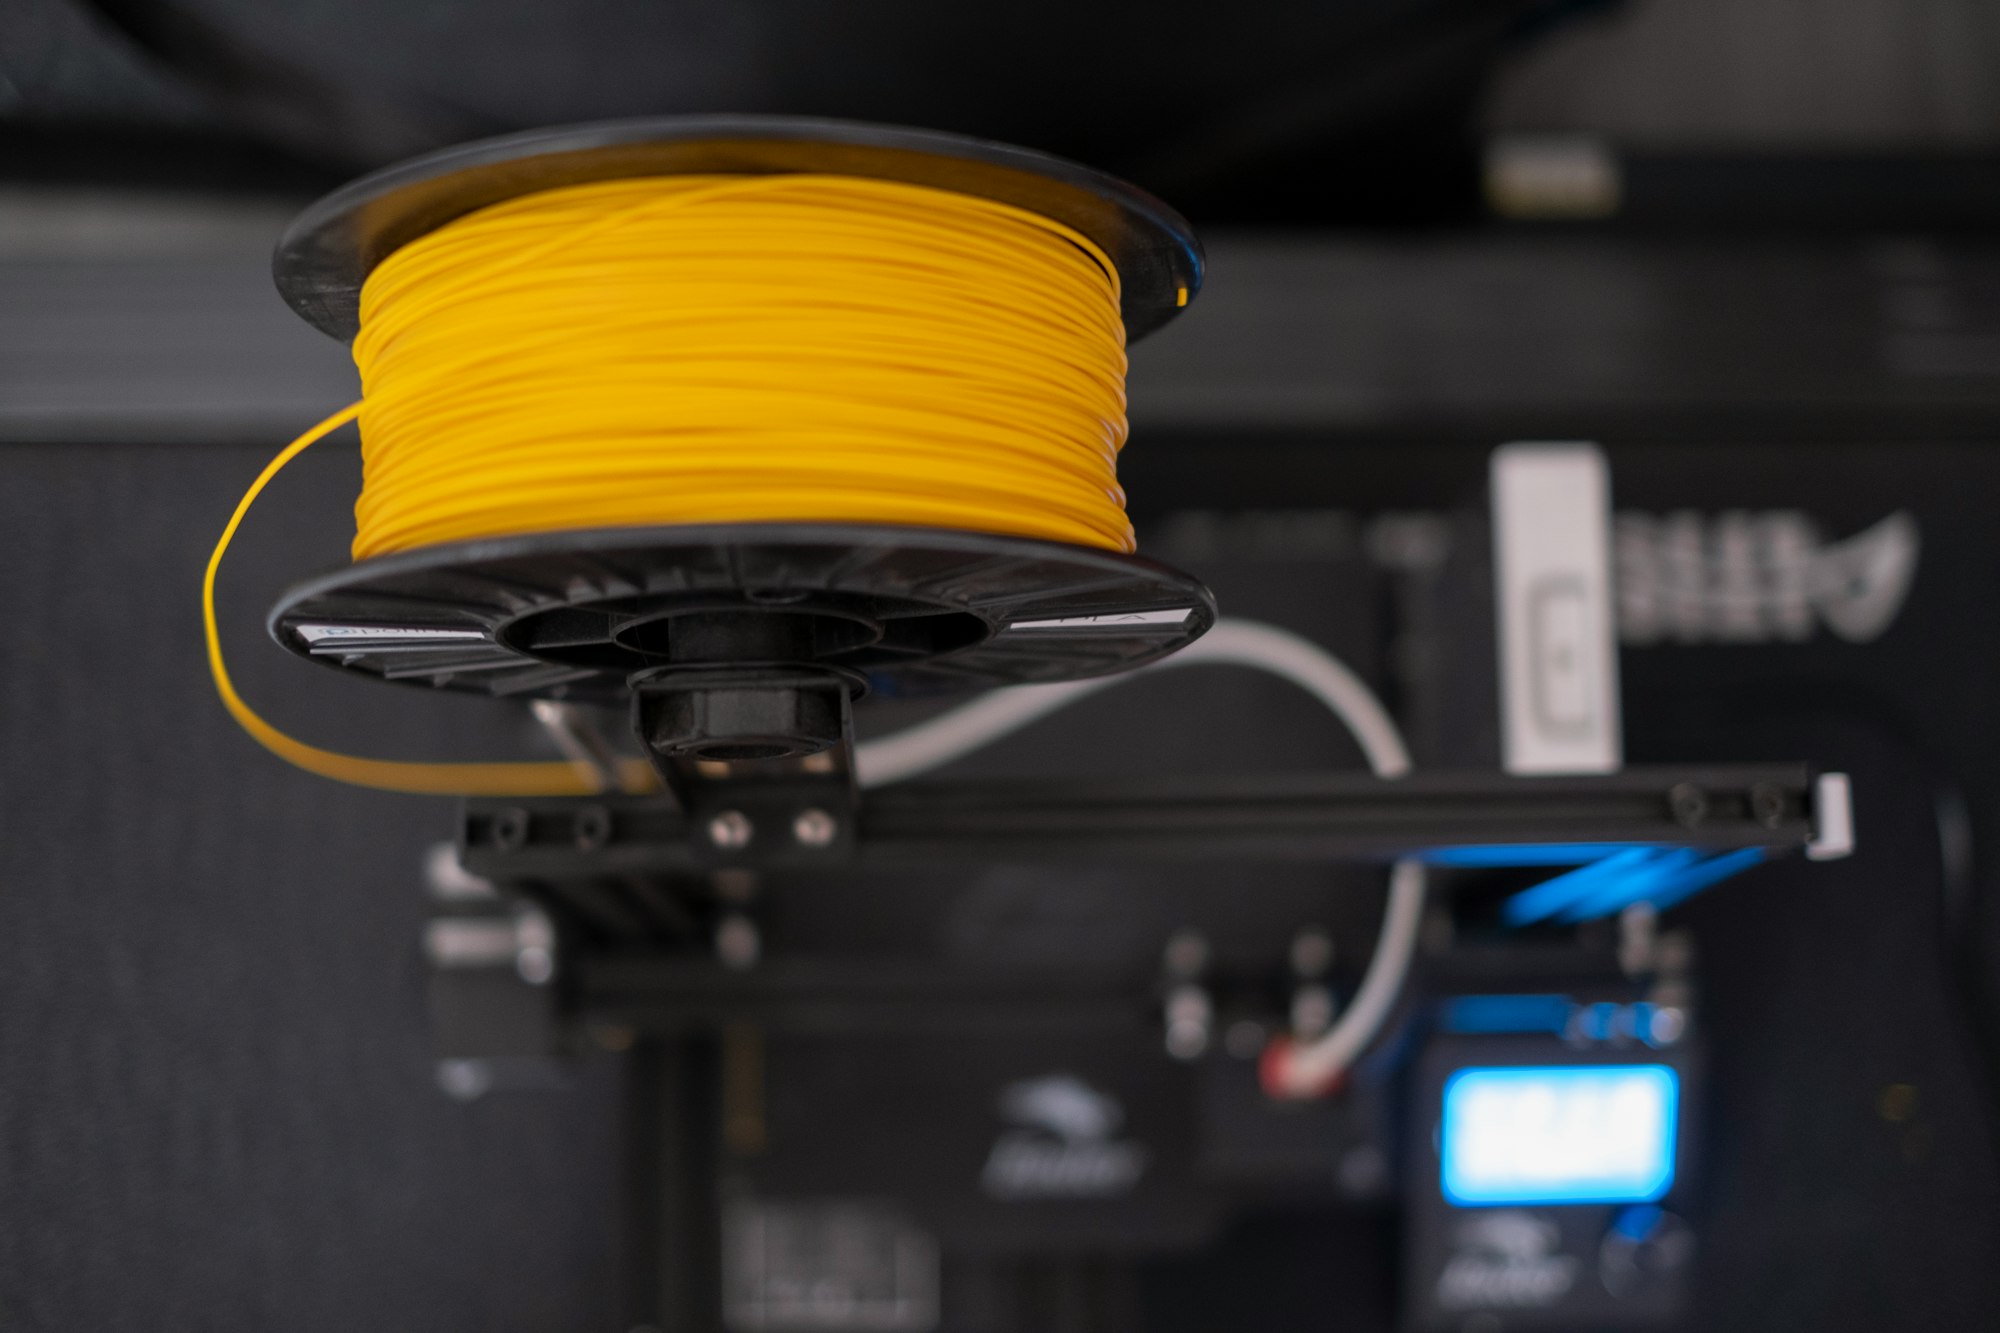 a spool of yellow filament wire sitting on top of a 3D printer